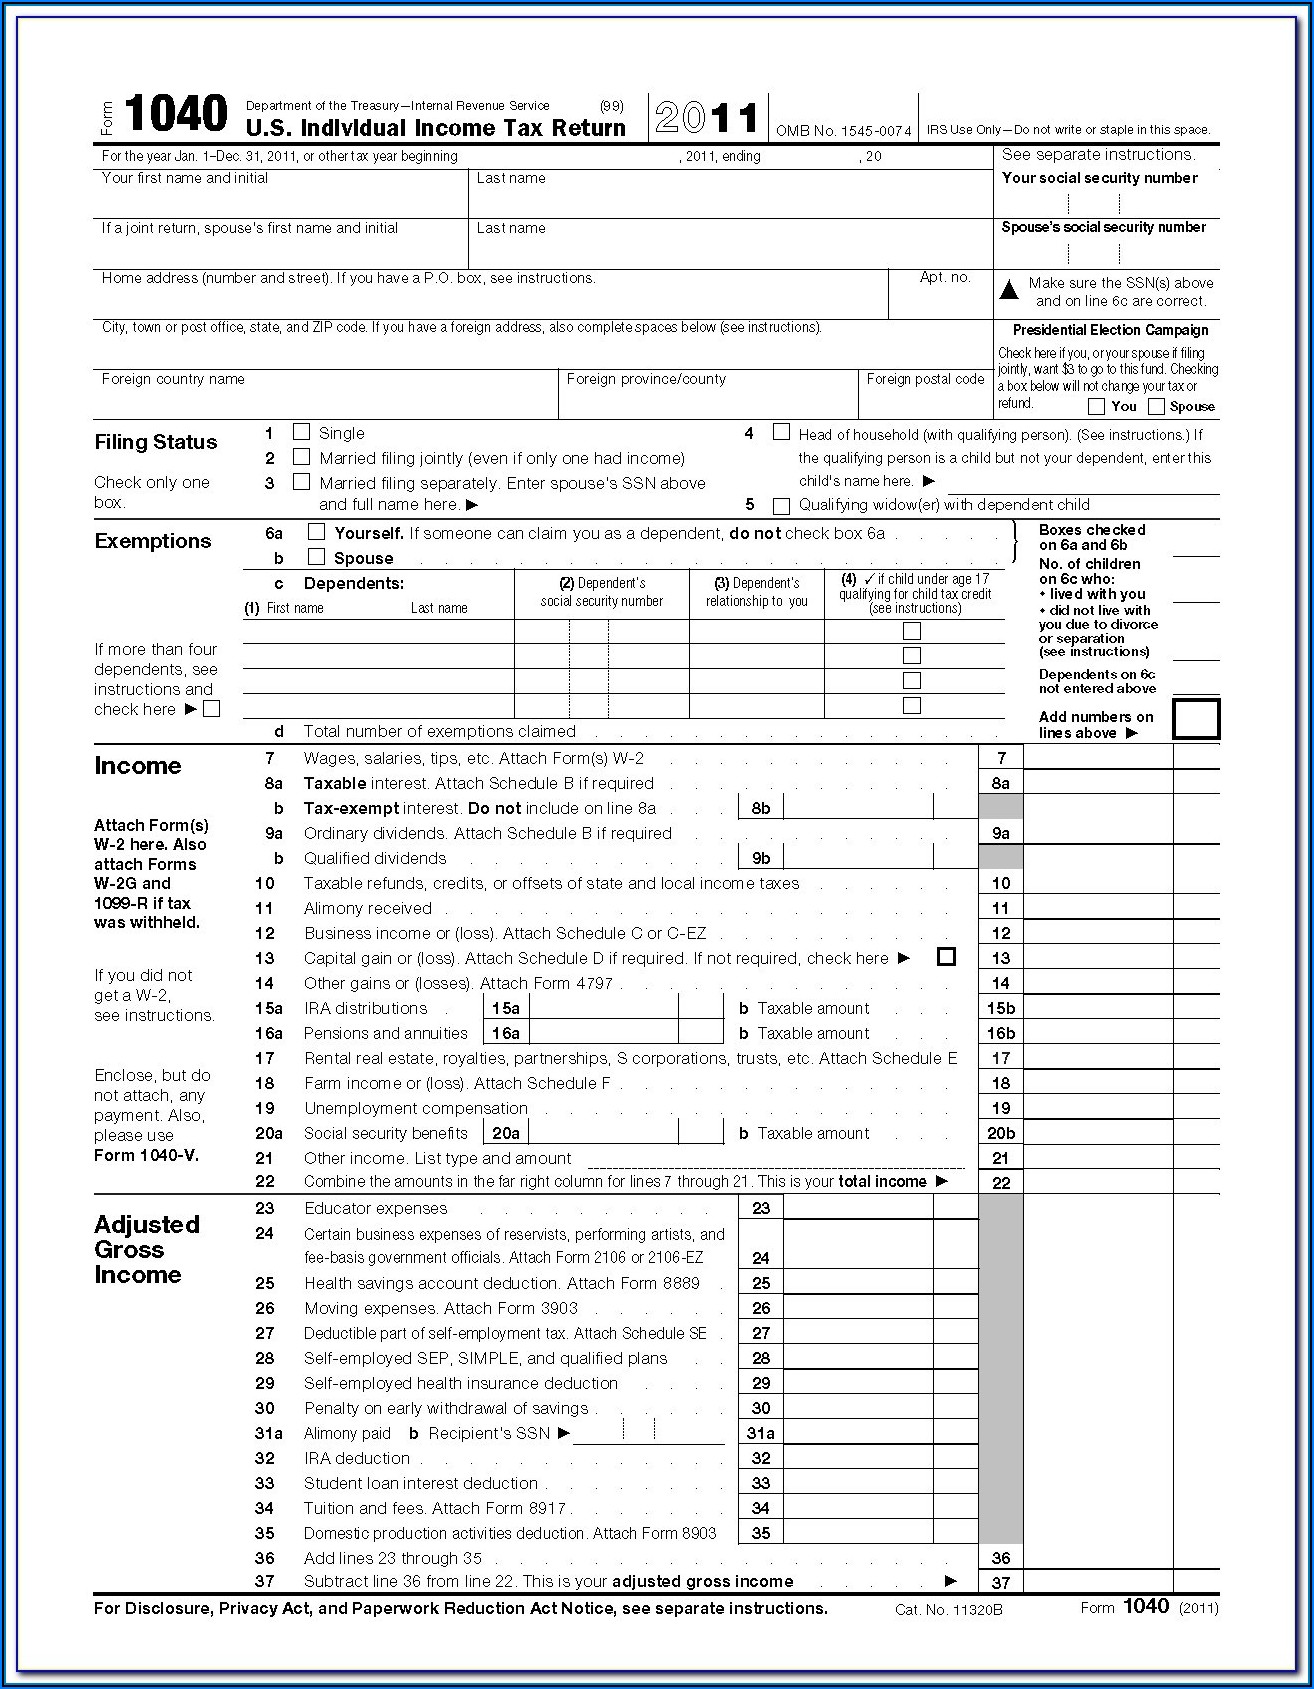 Irs Form 1040a 2012